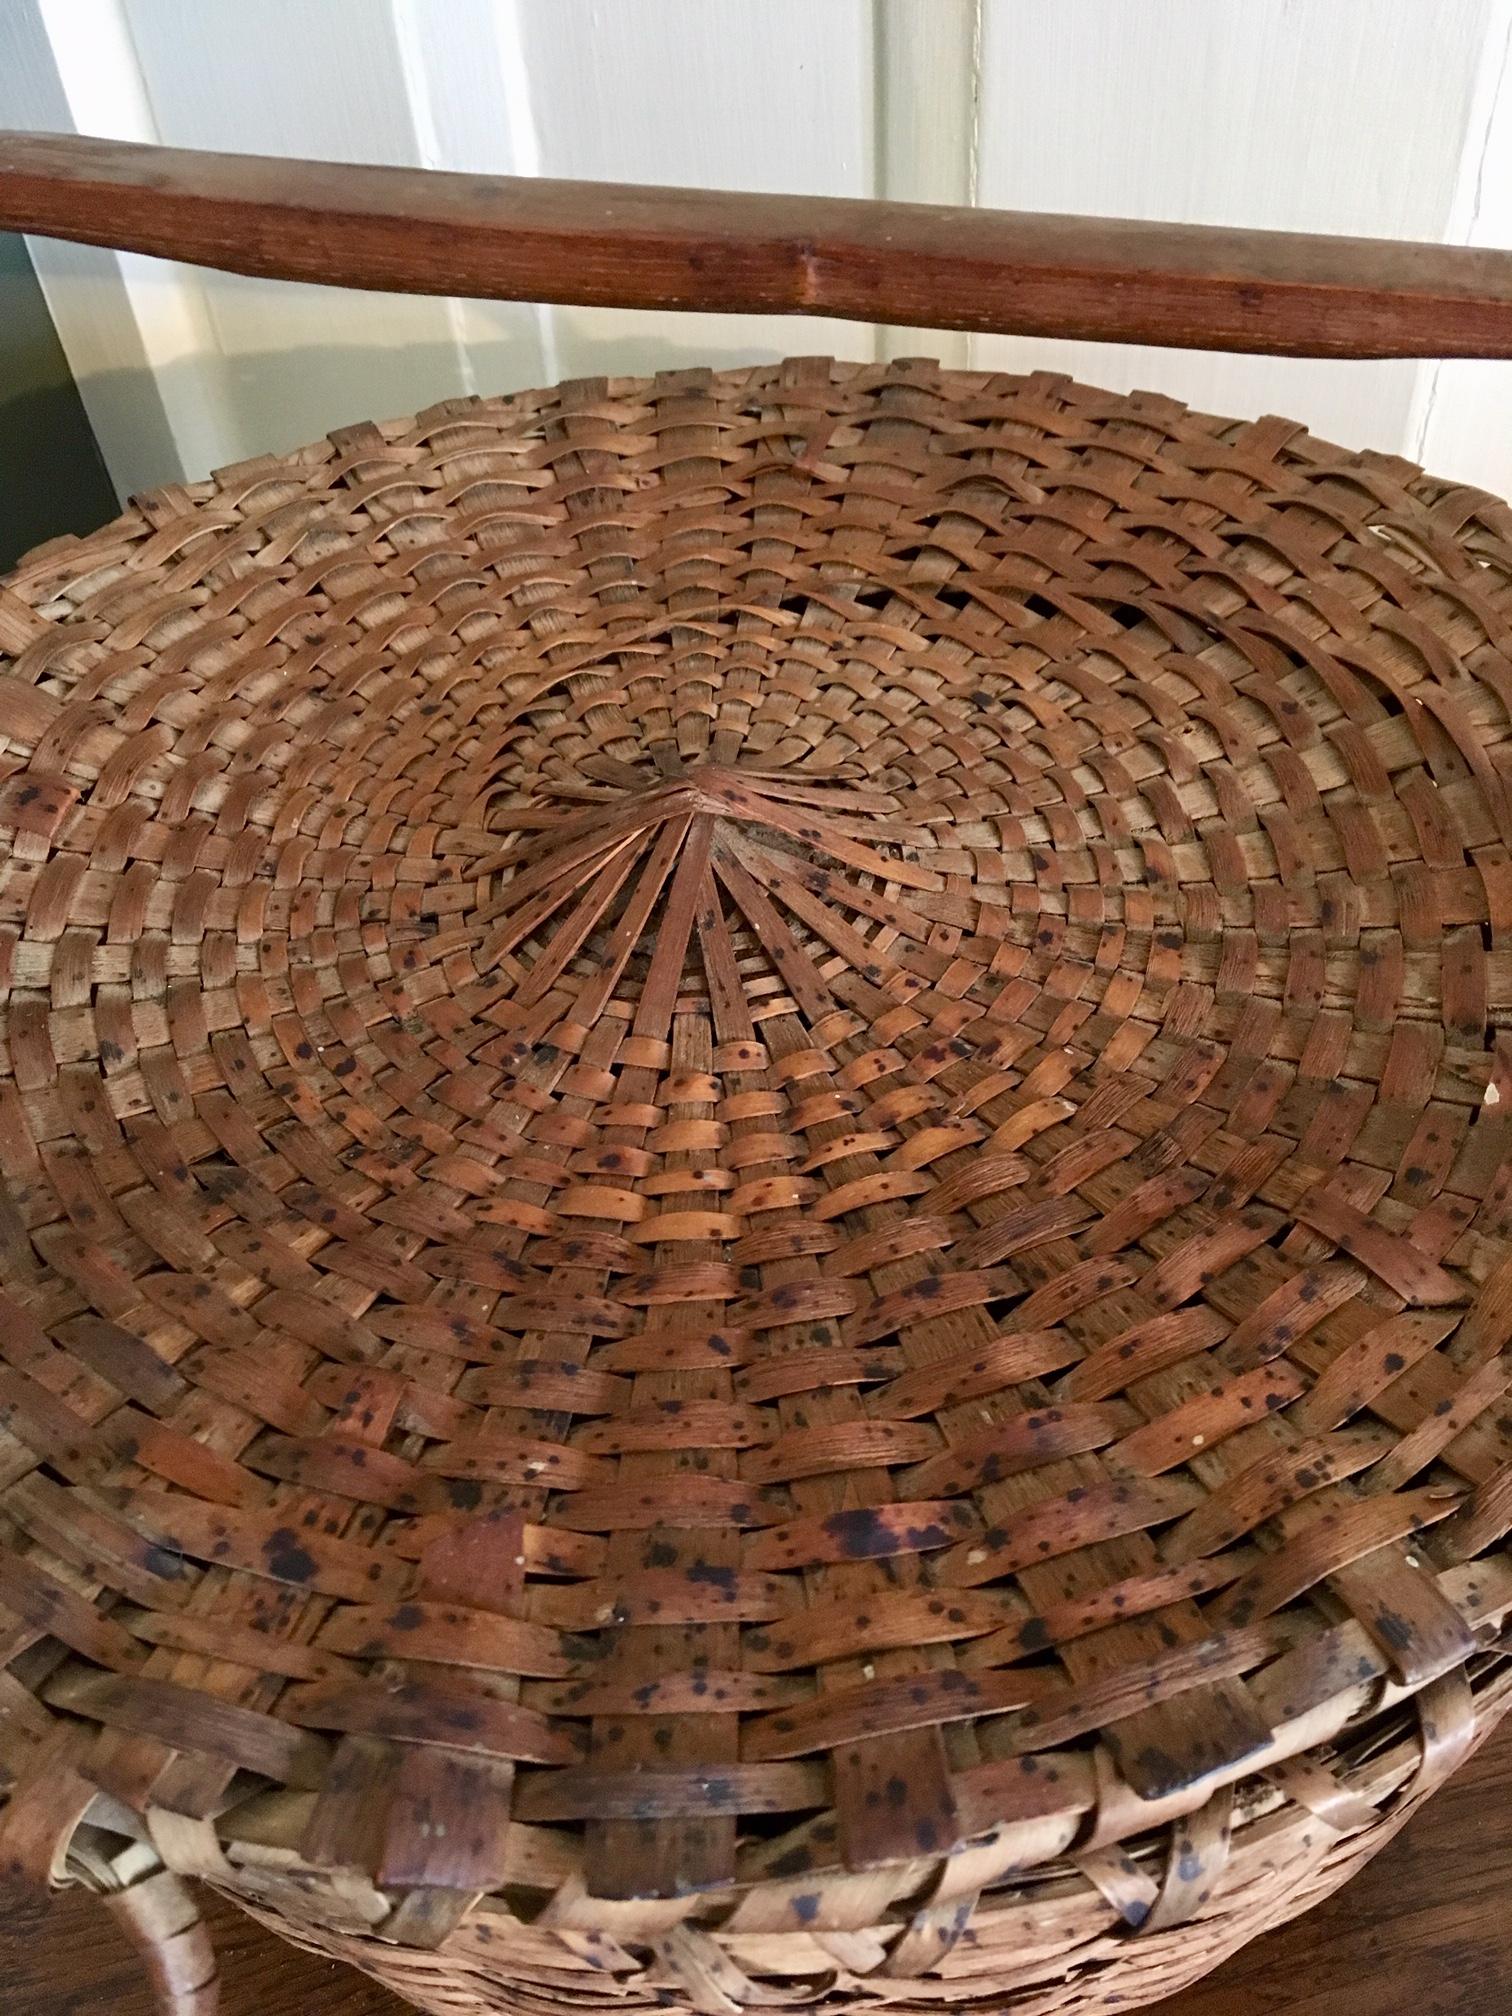 Very scarce 19th century woven splint covered basket for gathering feathers, certainly from New England, most likely by the Passamaquoddy Abenaki, circa 1840s-1850s. A round basket of shaved ash splint, with stationary carved wooden handle,